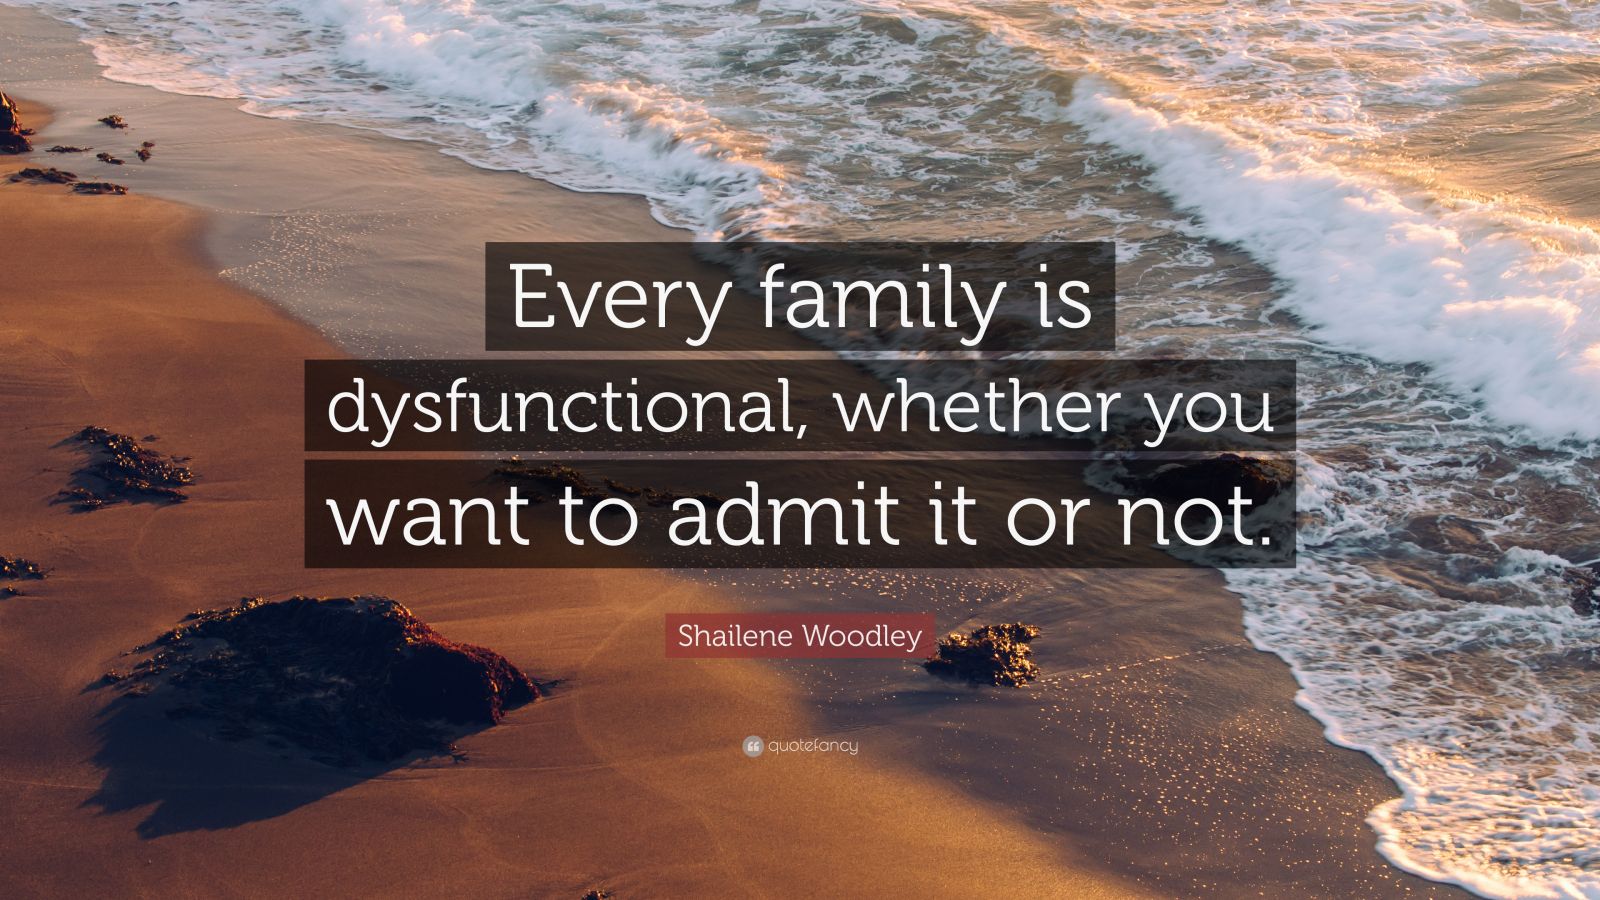 Shailene Woodley Quote: “Every family is dysfunctional, whether you ...